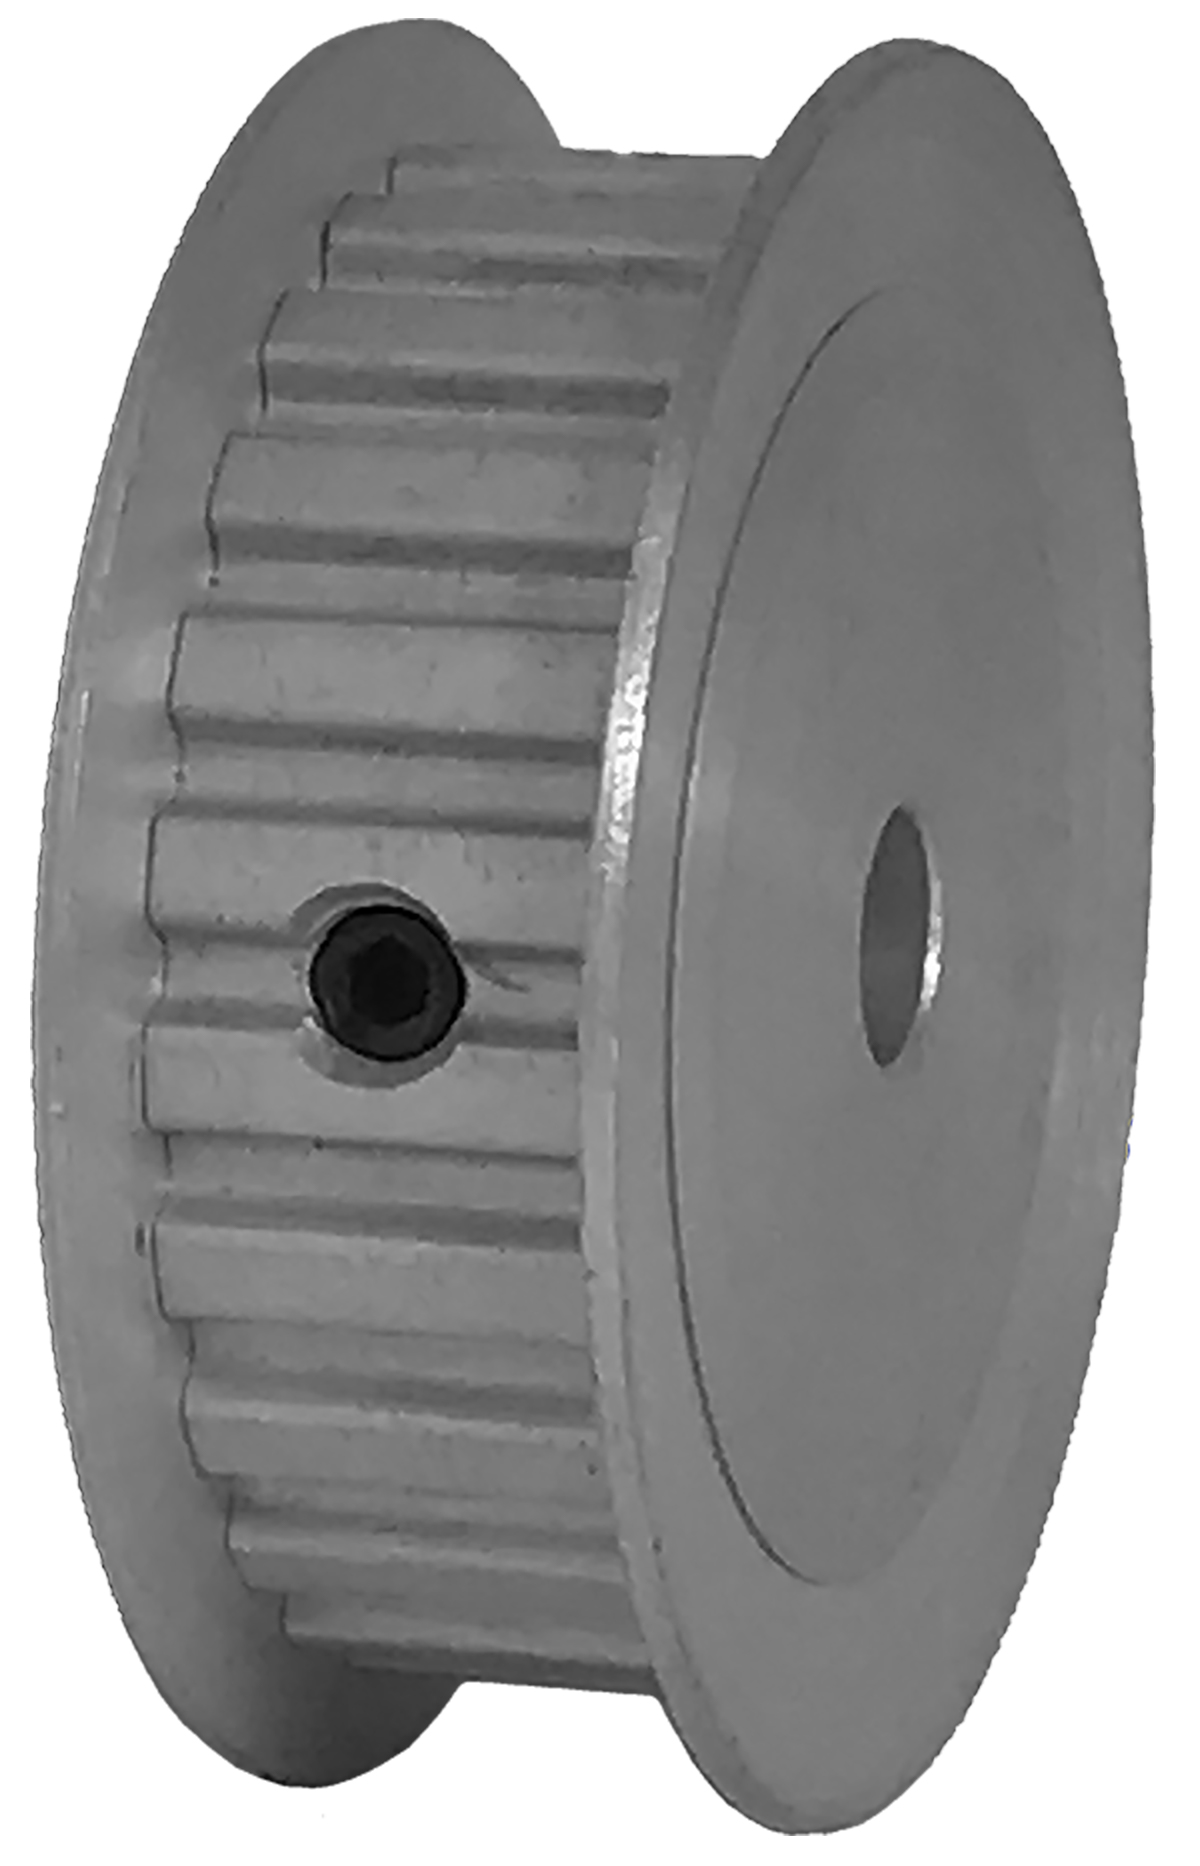 24XL037-3FA3 - Aluminum Imperial Pitch Pulleys